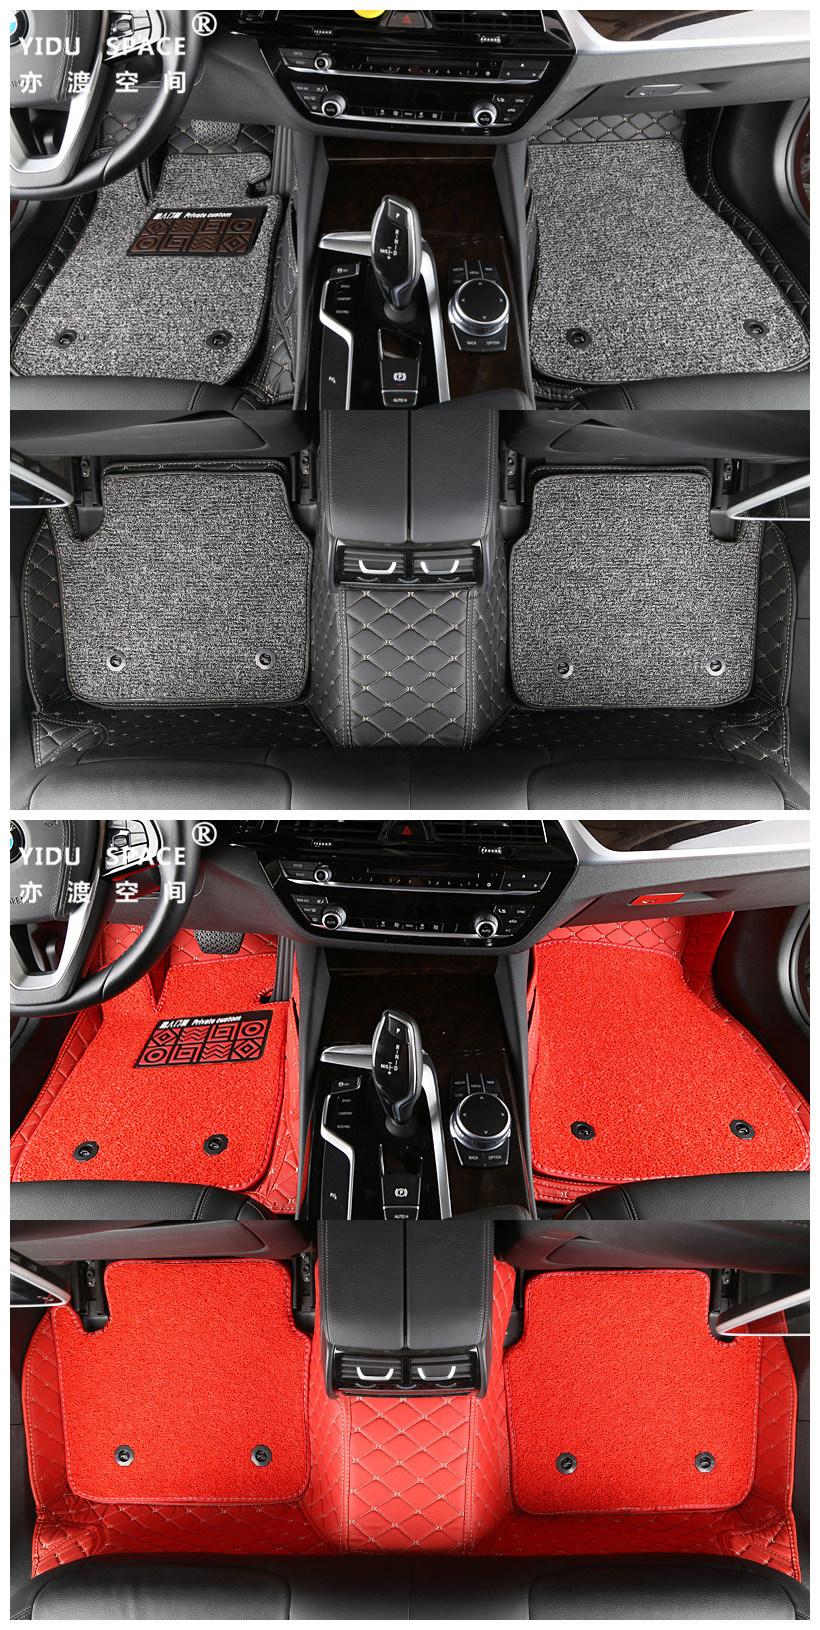 Wholesale Customized Hand Sewing Leather 5D Anti Slip Car Mat